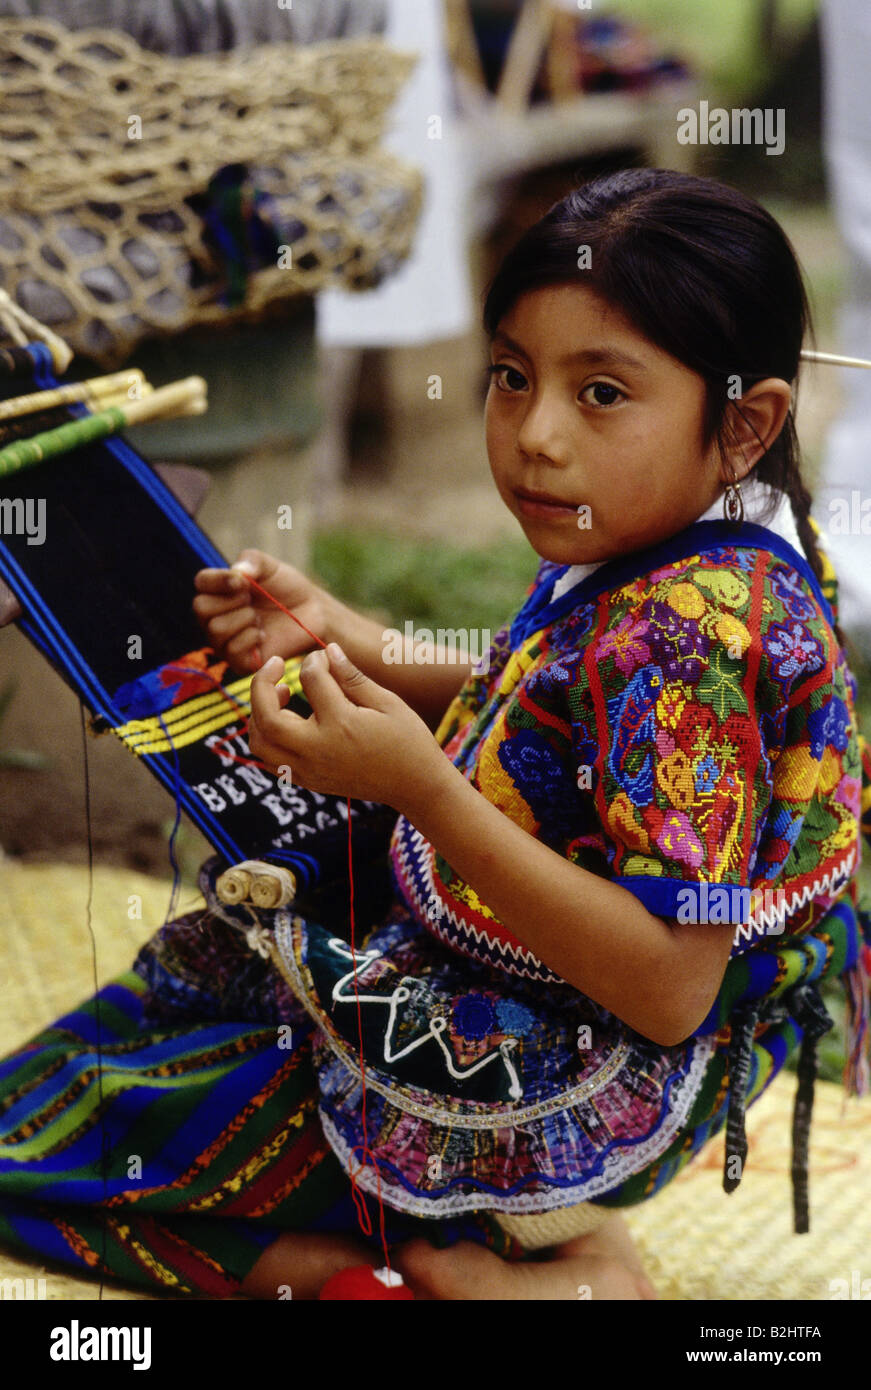 people, children, Guatemala, girl working at loom, Central America, indigenous, native, weaving, child, work, CEAM, Stock Photo